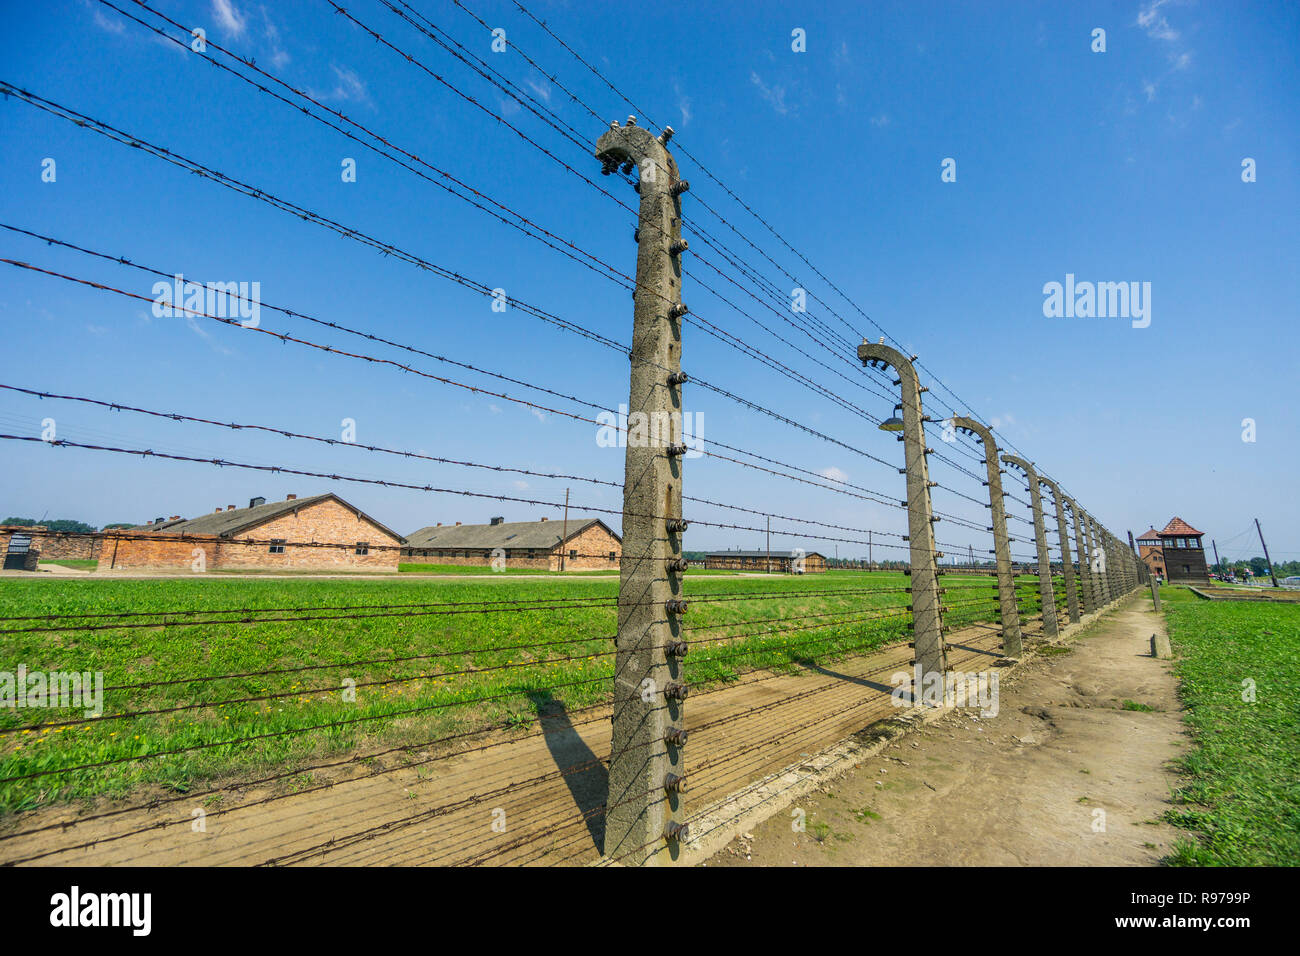 Fence and watchtower surrounding residential buildings in Auschwitz-Birkenau concentration camp used by Nazis during World War II, Poland Stock Photo